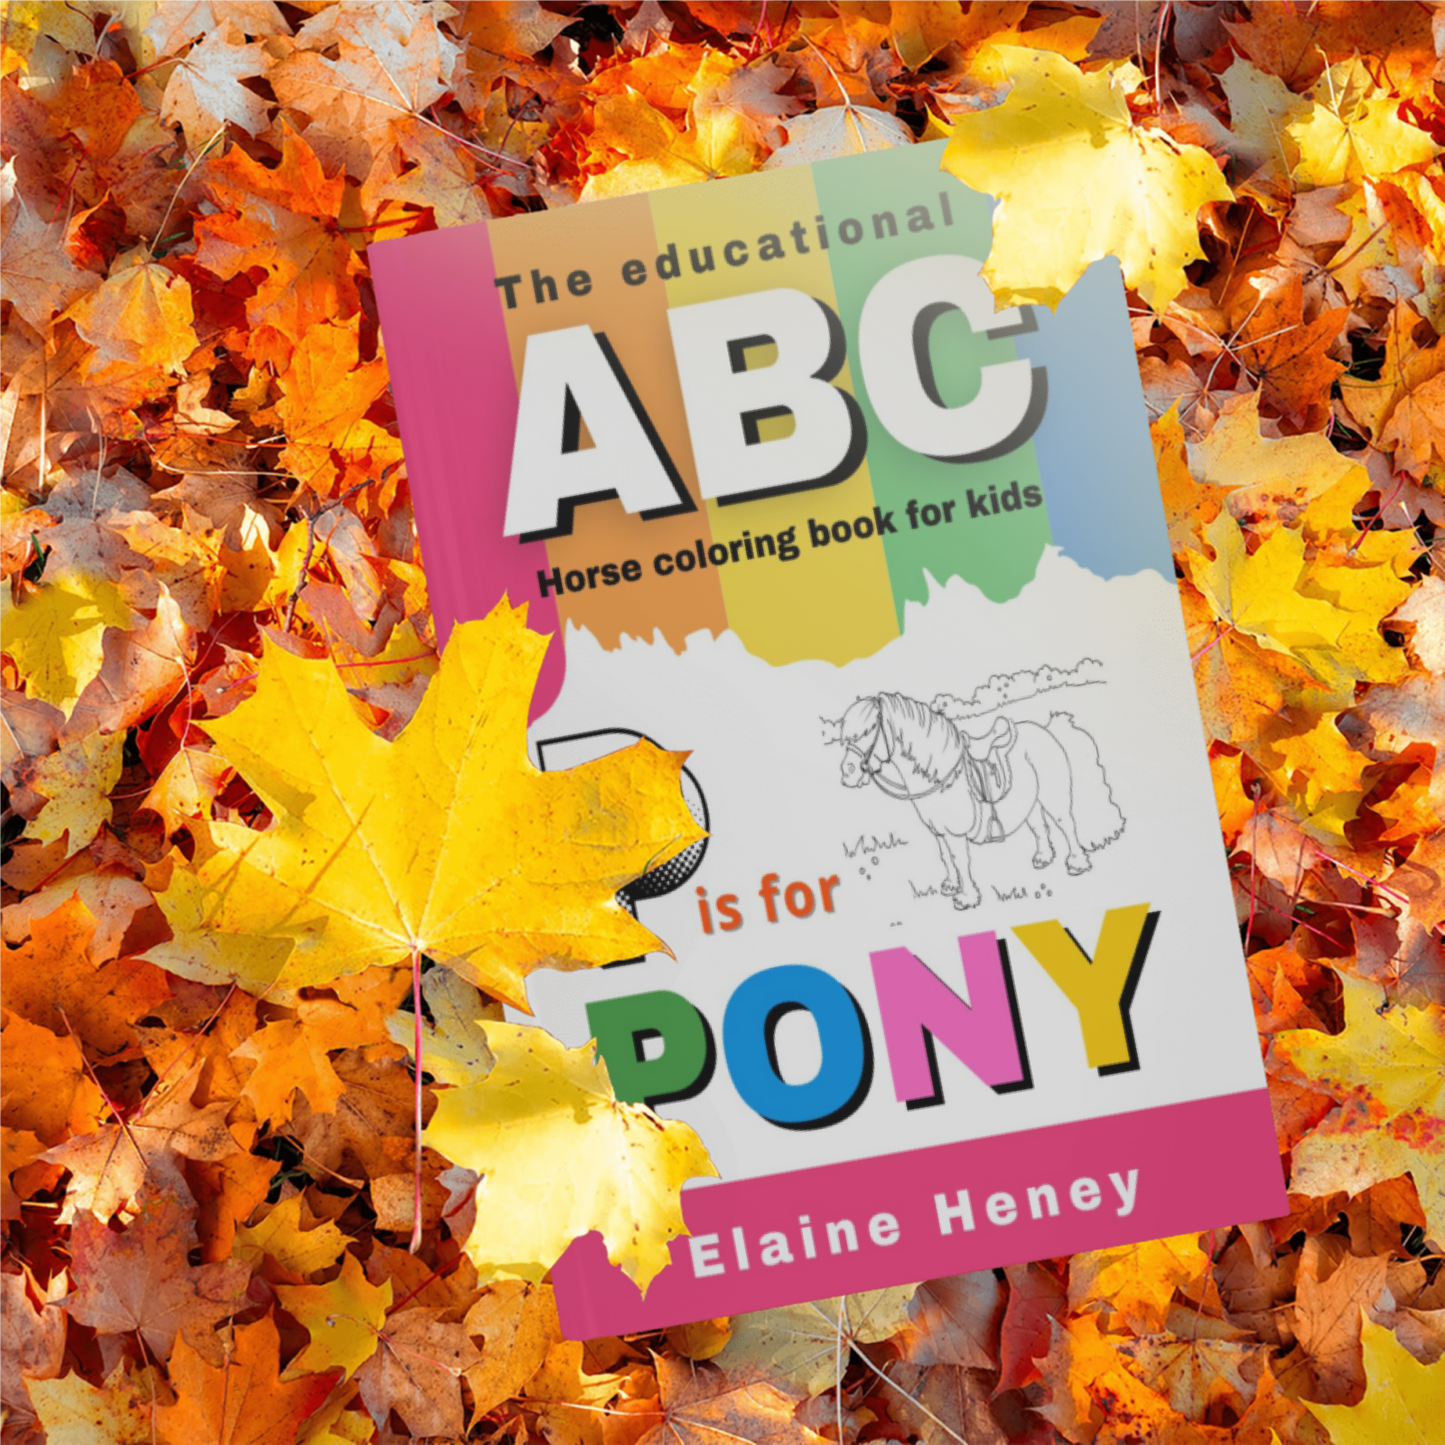 The educational ABC horse colouring book for kids | P is for Pony | UK EDITION